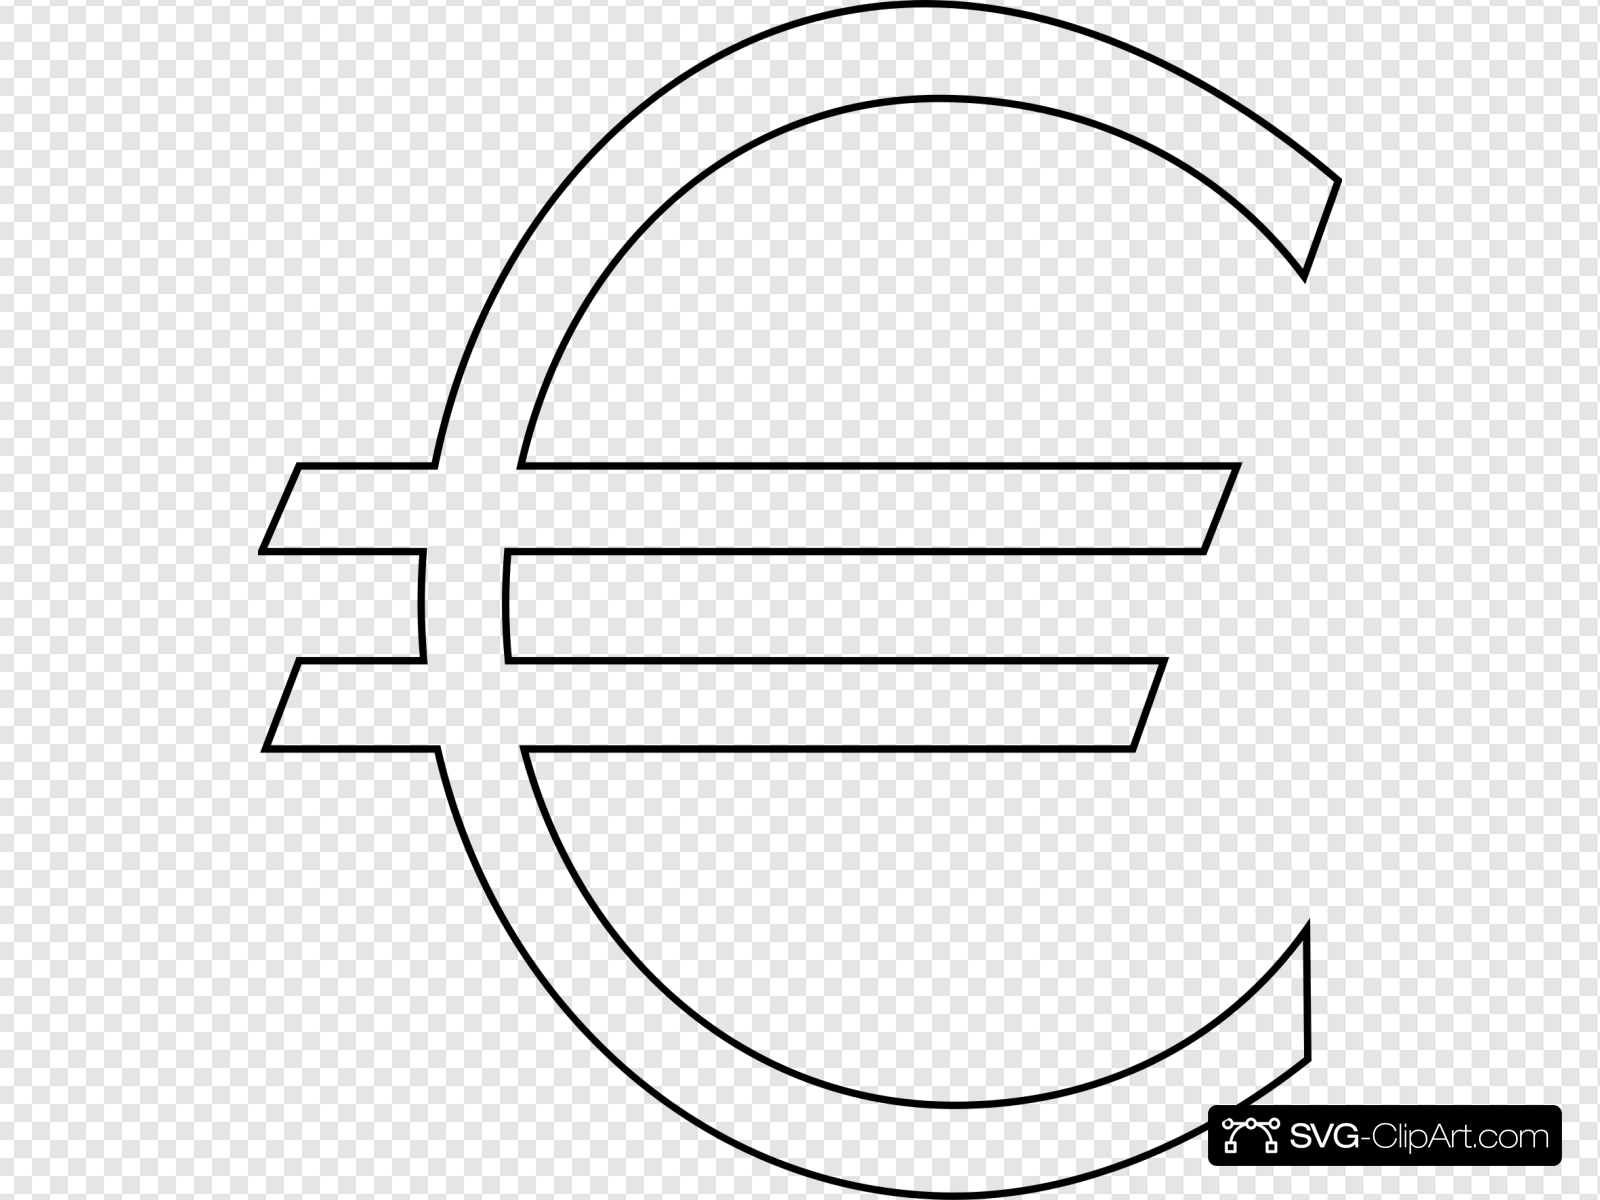 Euro Sign Outline Clip art, Icon and SVG.